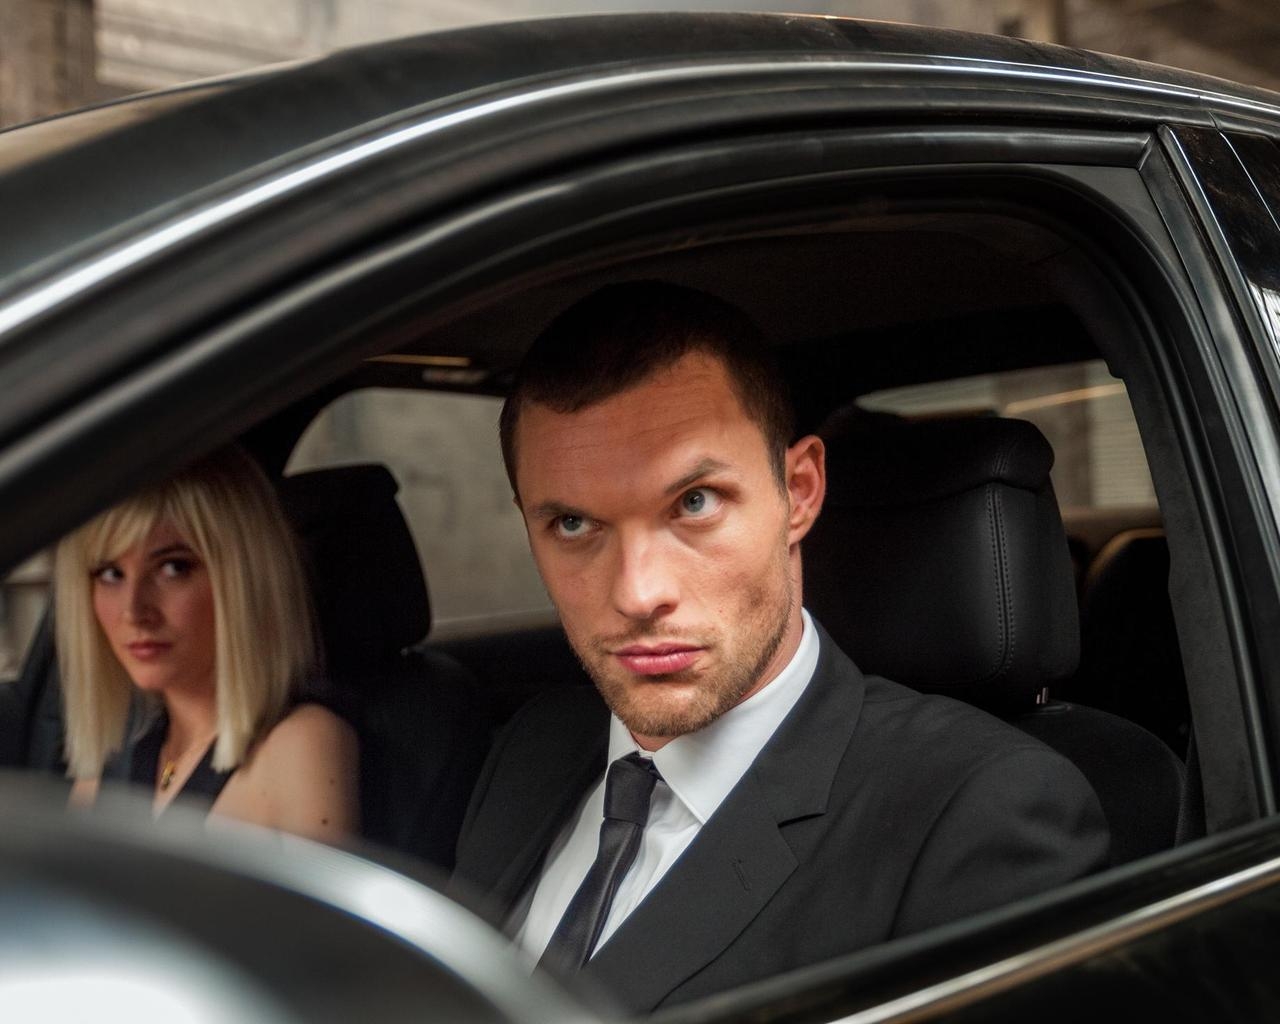 Transporter Refueled for 1280 x 1024 resolution